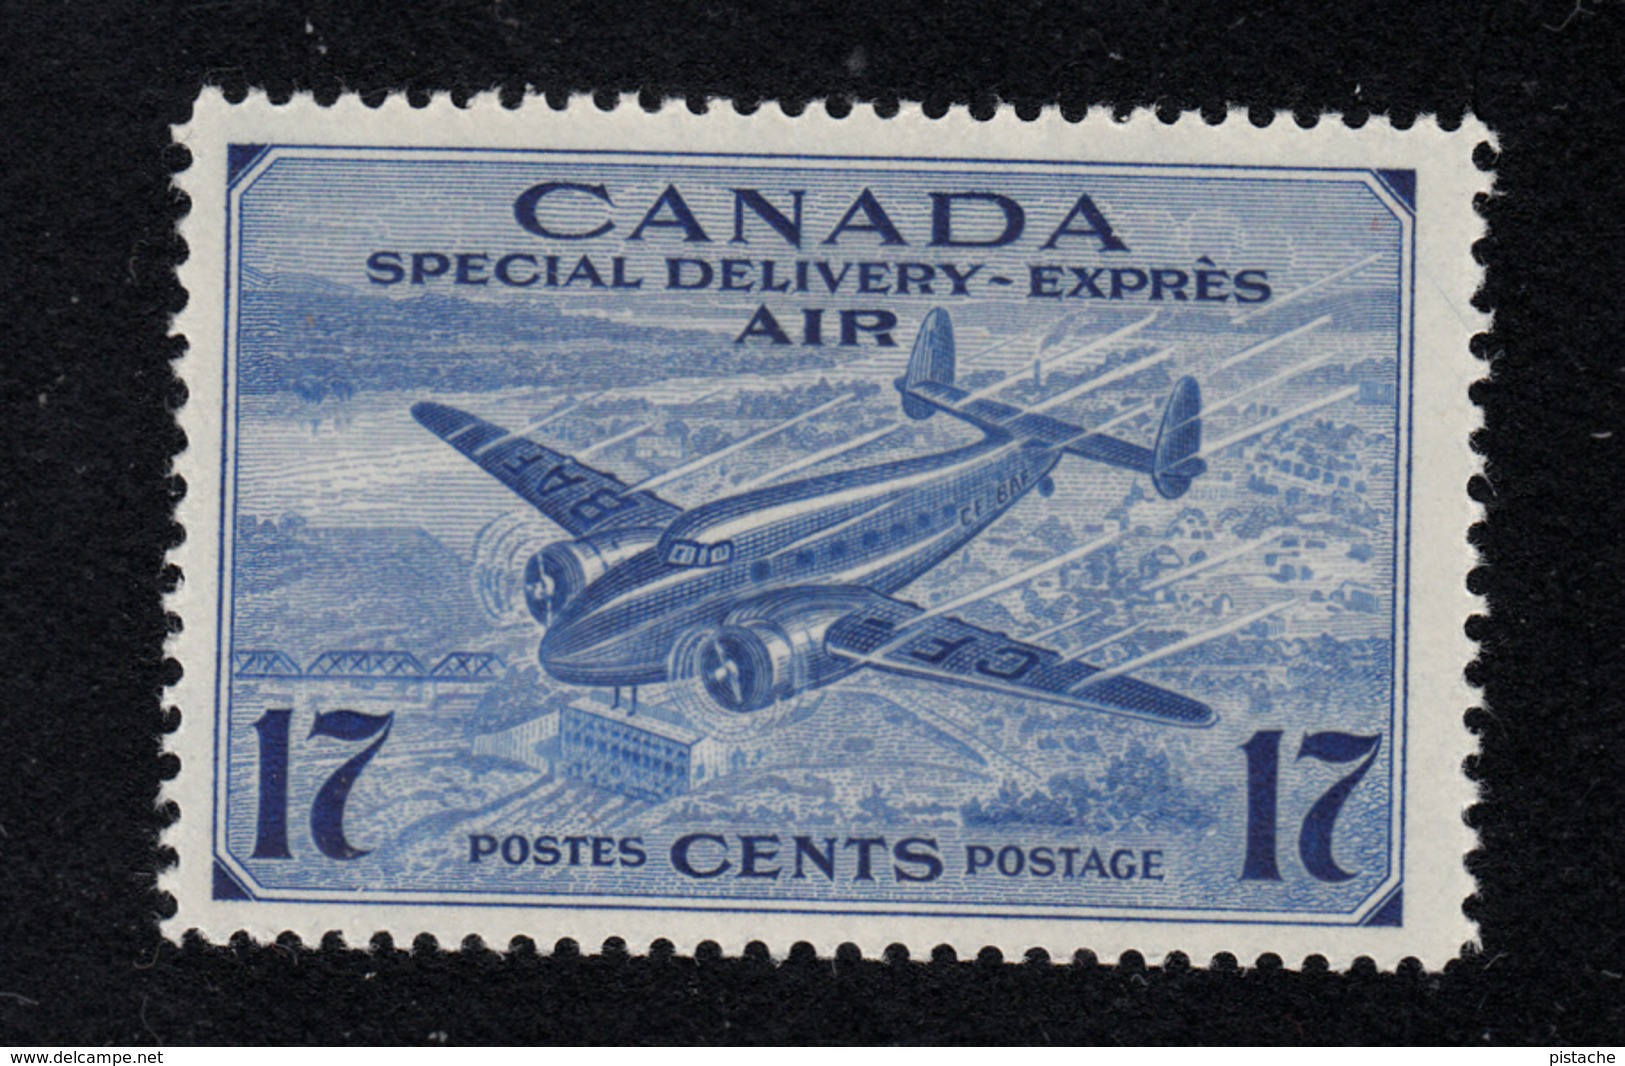 Canada Air Mail Special Delivery Stamp CE2 - Mint Never Hinged - VF Condition - Posta Aerea: Espressi